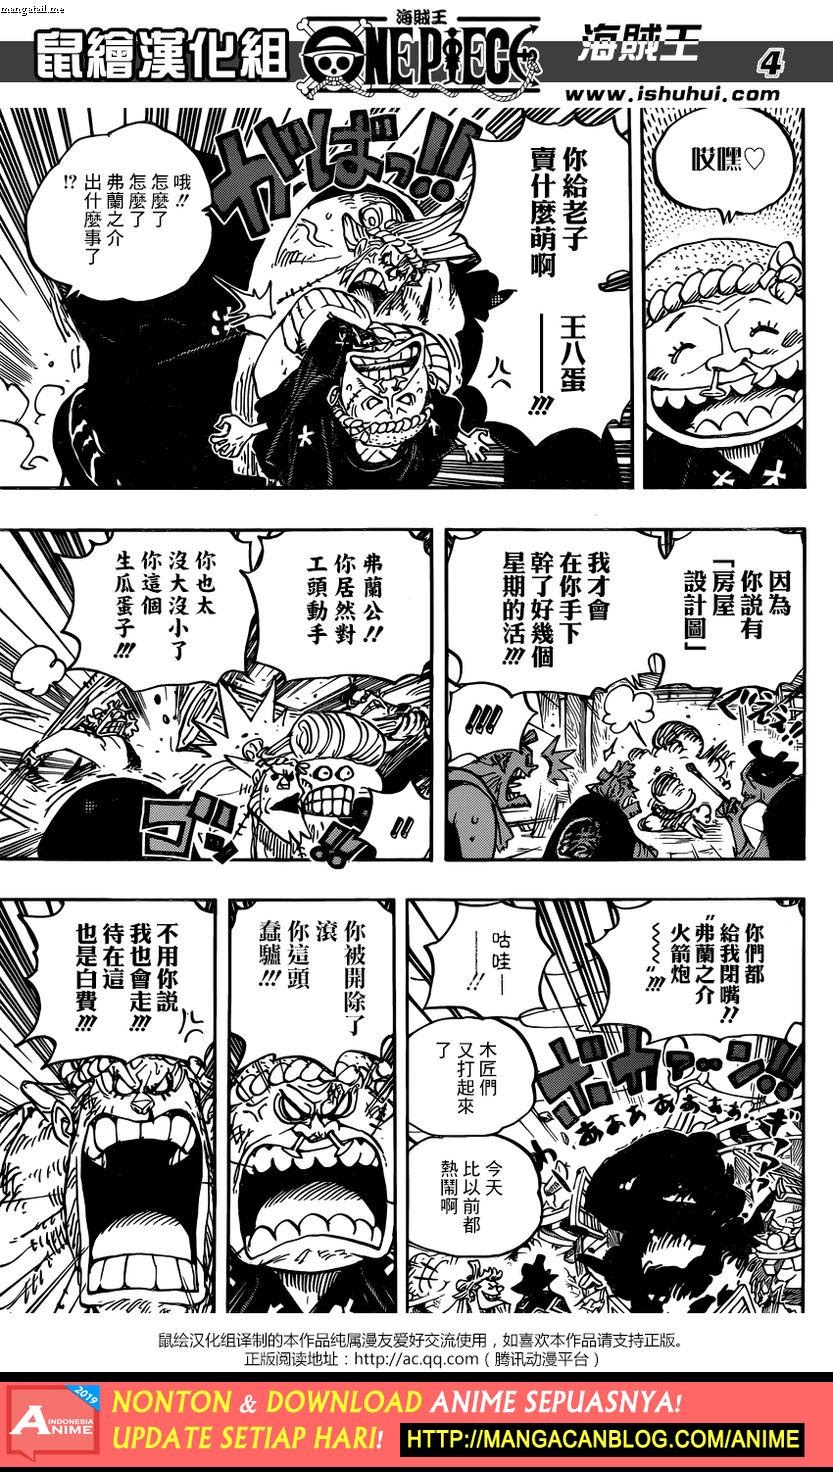 One Piece Chapter 928 – Raw - 97